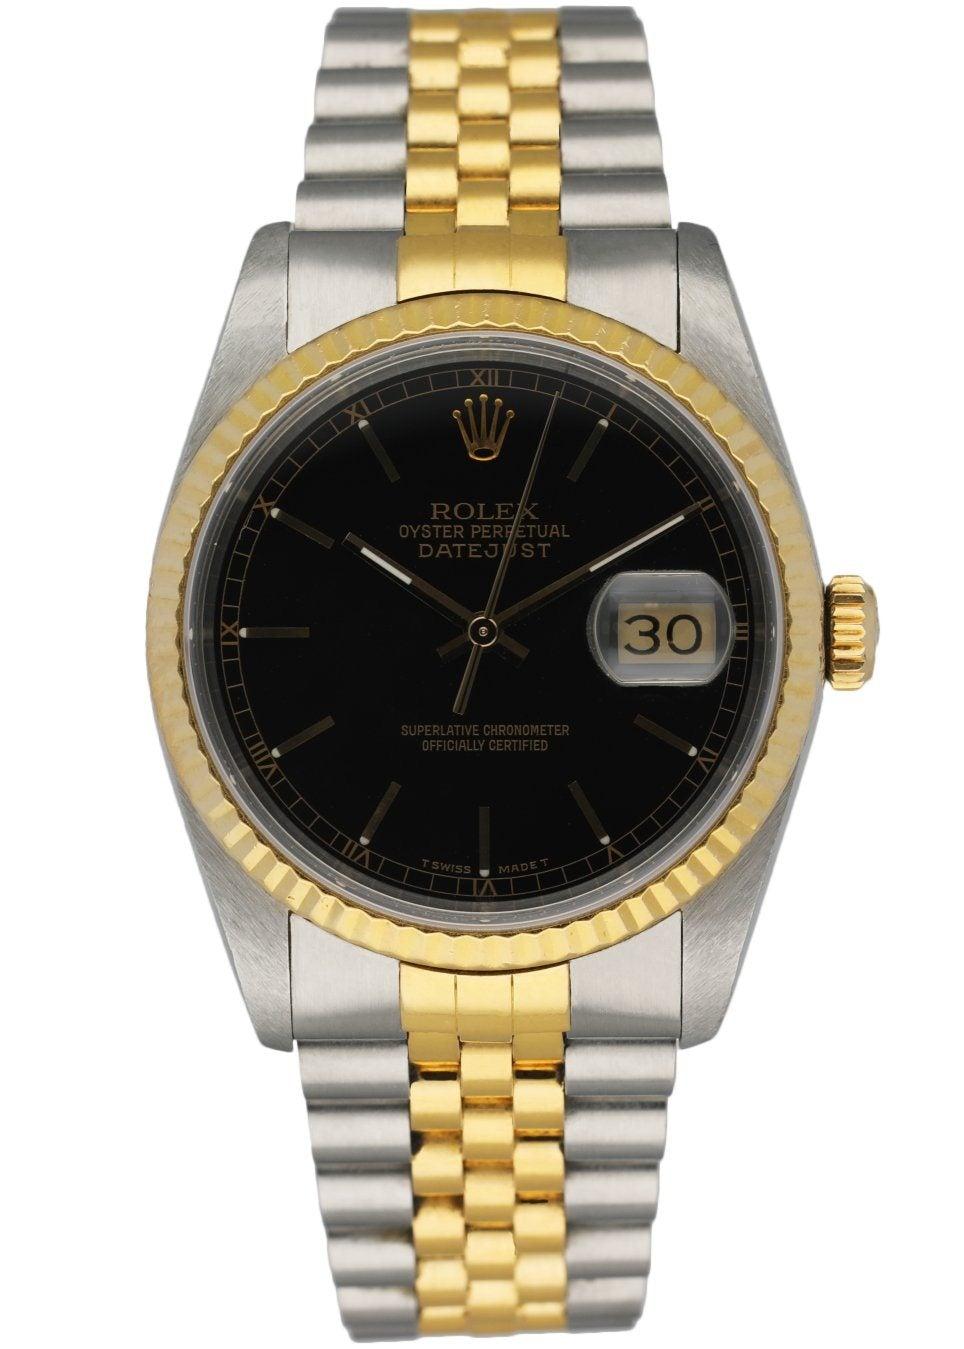 Rolex Datejust 16233 Men's Watch. 36mm stainless steel case with 18K yellow gold fluted bezel. Black dial with luminous gold hands and index hour markers. Minute markers around the outer dial. Date display at the 3 o'clock position. Two-tone,